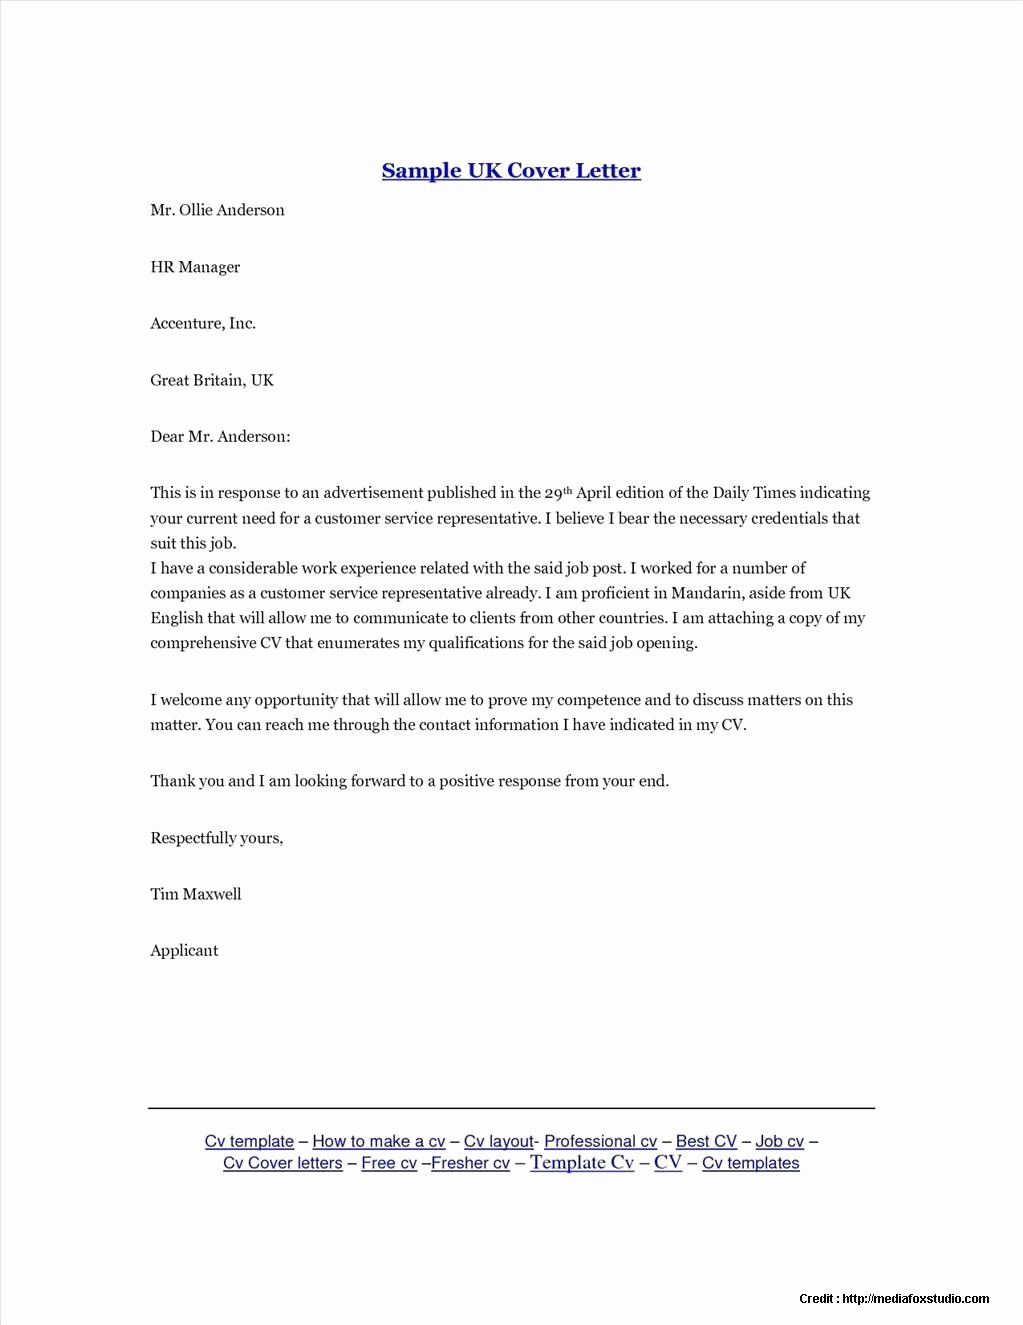 Free Examples Of Cover Letter Unique Free Cover Letter Template Uk Cover Letter Resume